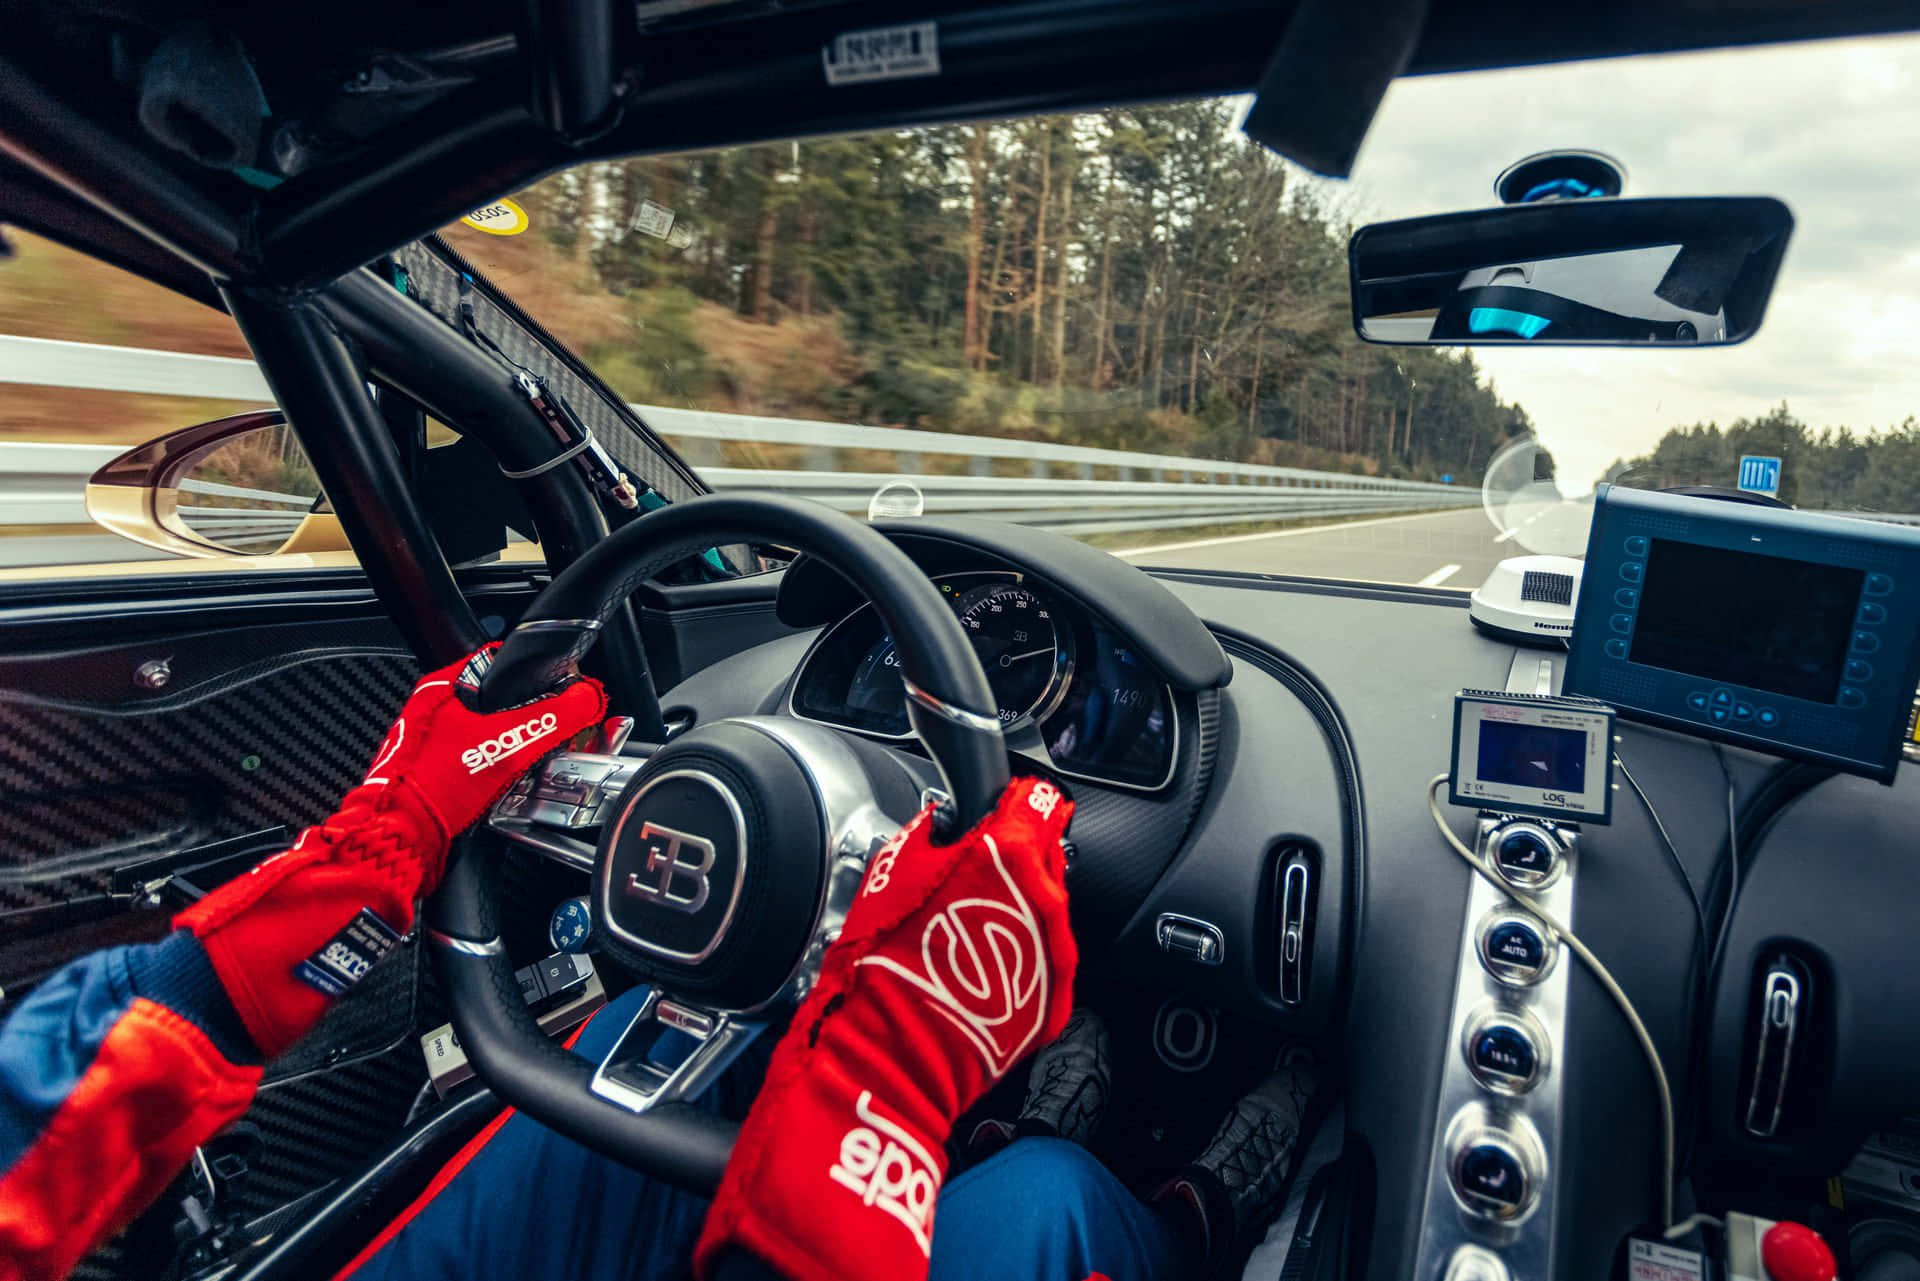 Audi R8 Ls1 Driver In The Cockpit